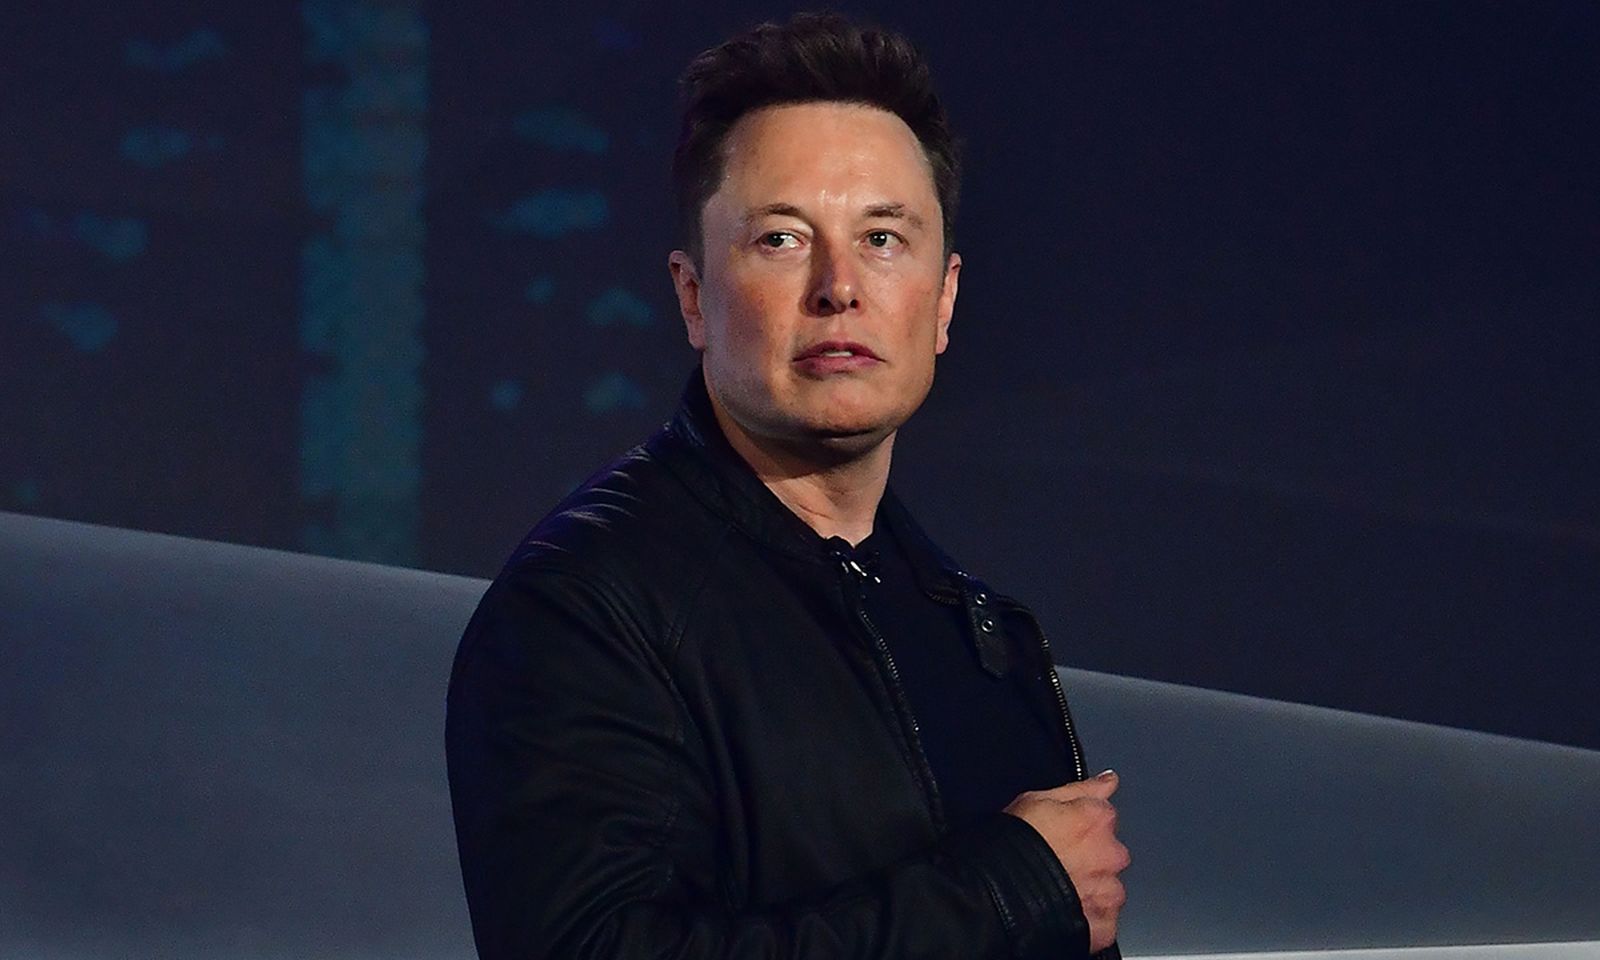 Elon Musk on stage at Tesla cybertruck unveiling